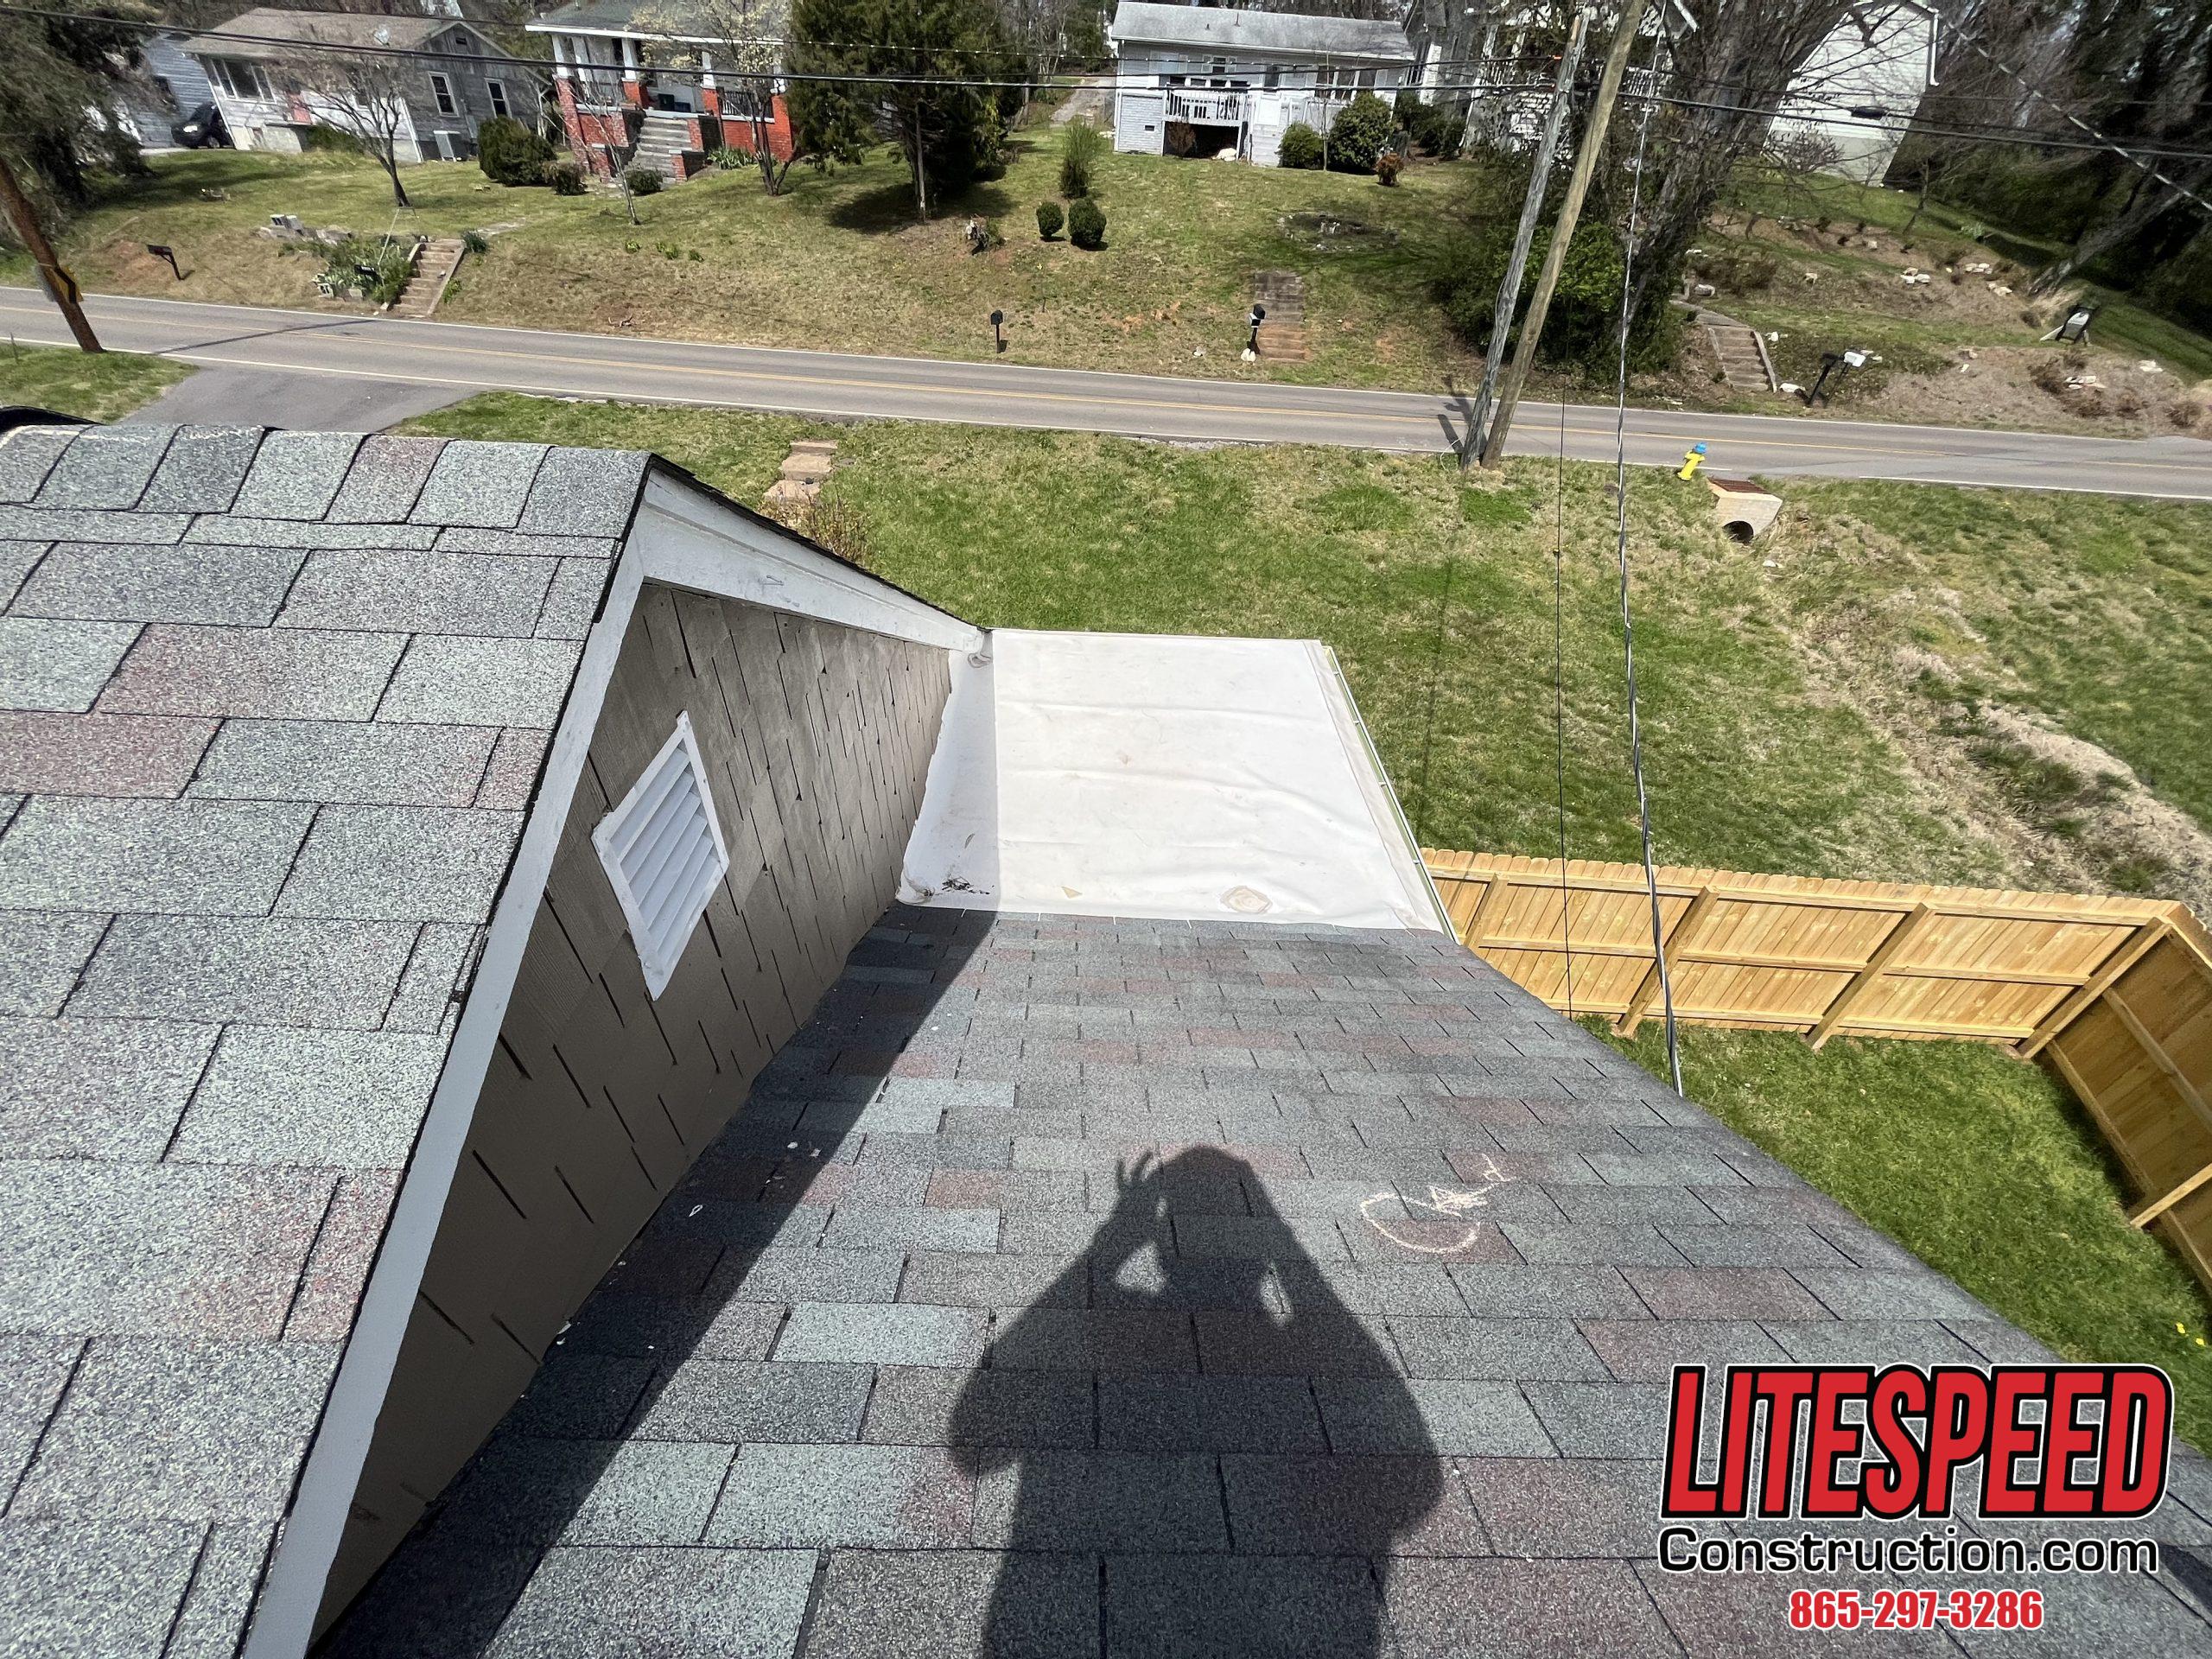 This is a picture of a flat roof that ties into a shingle roof 